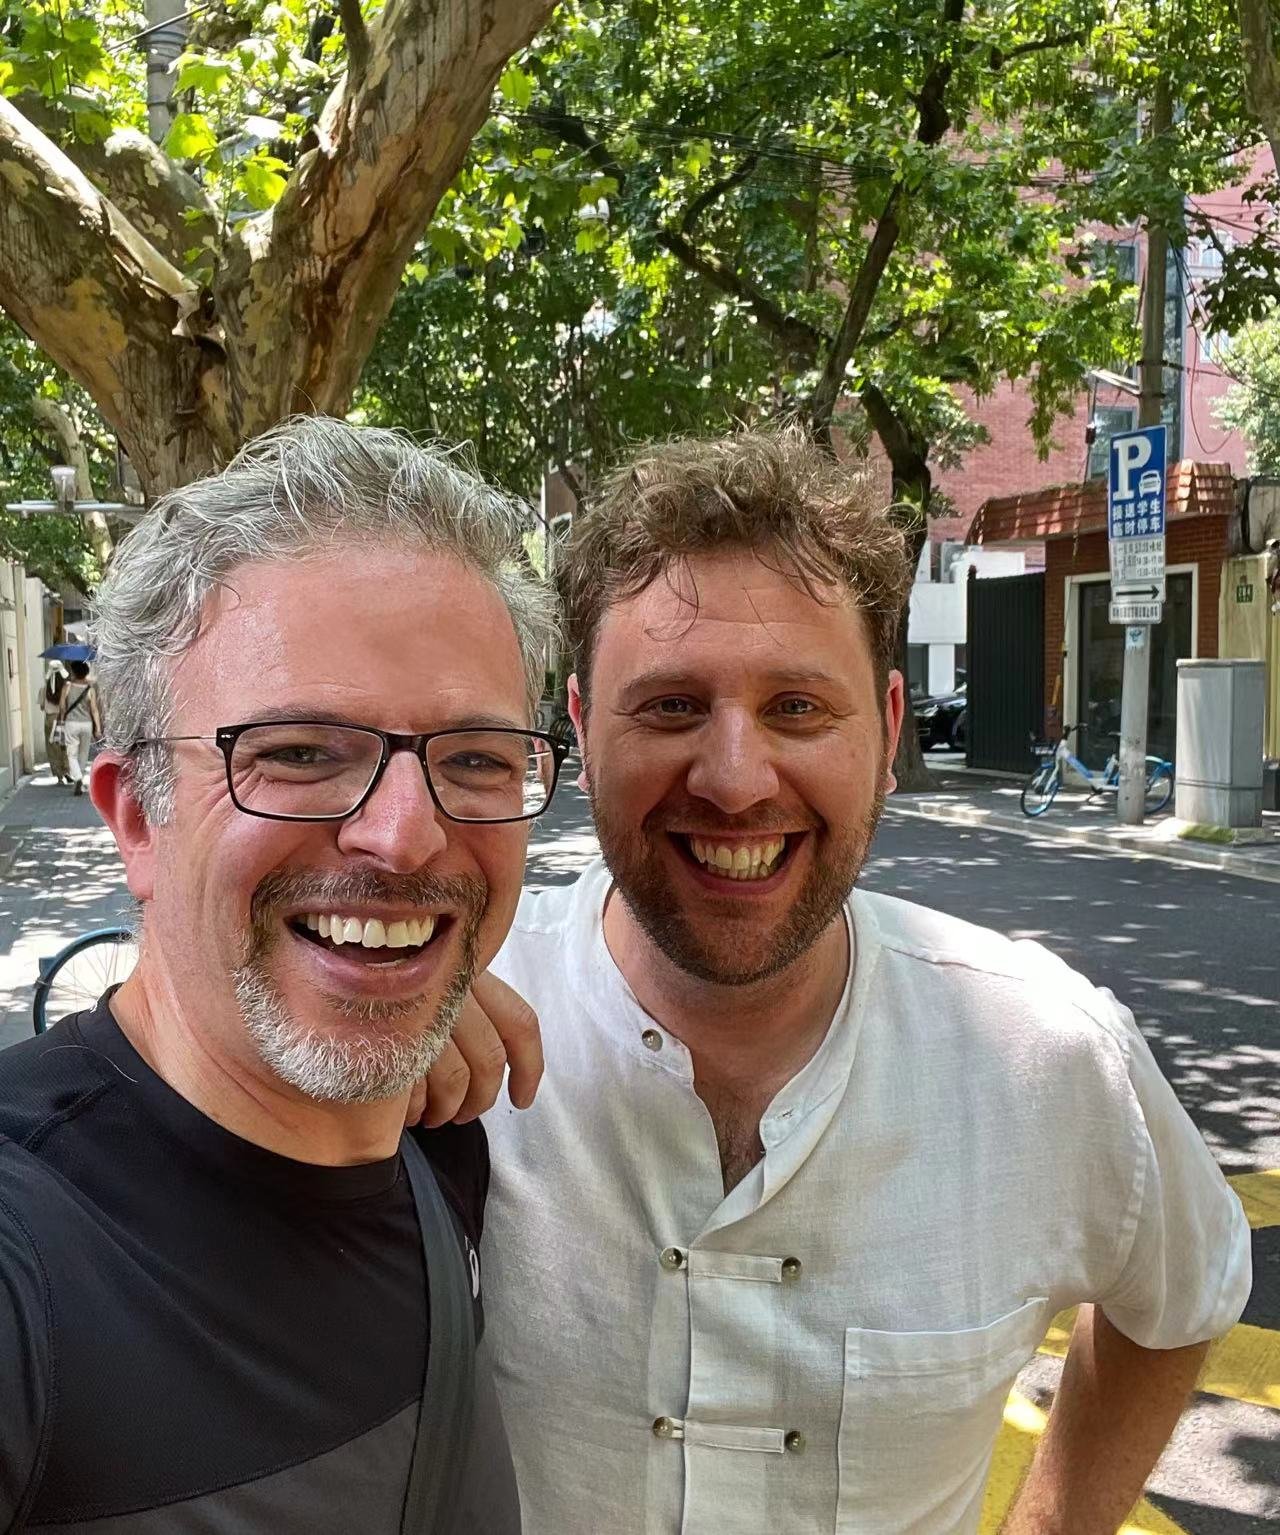 Björn and Oscar reconnected on the streets of Shanghai last week.